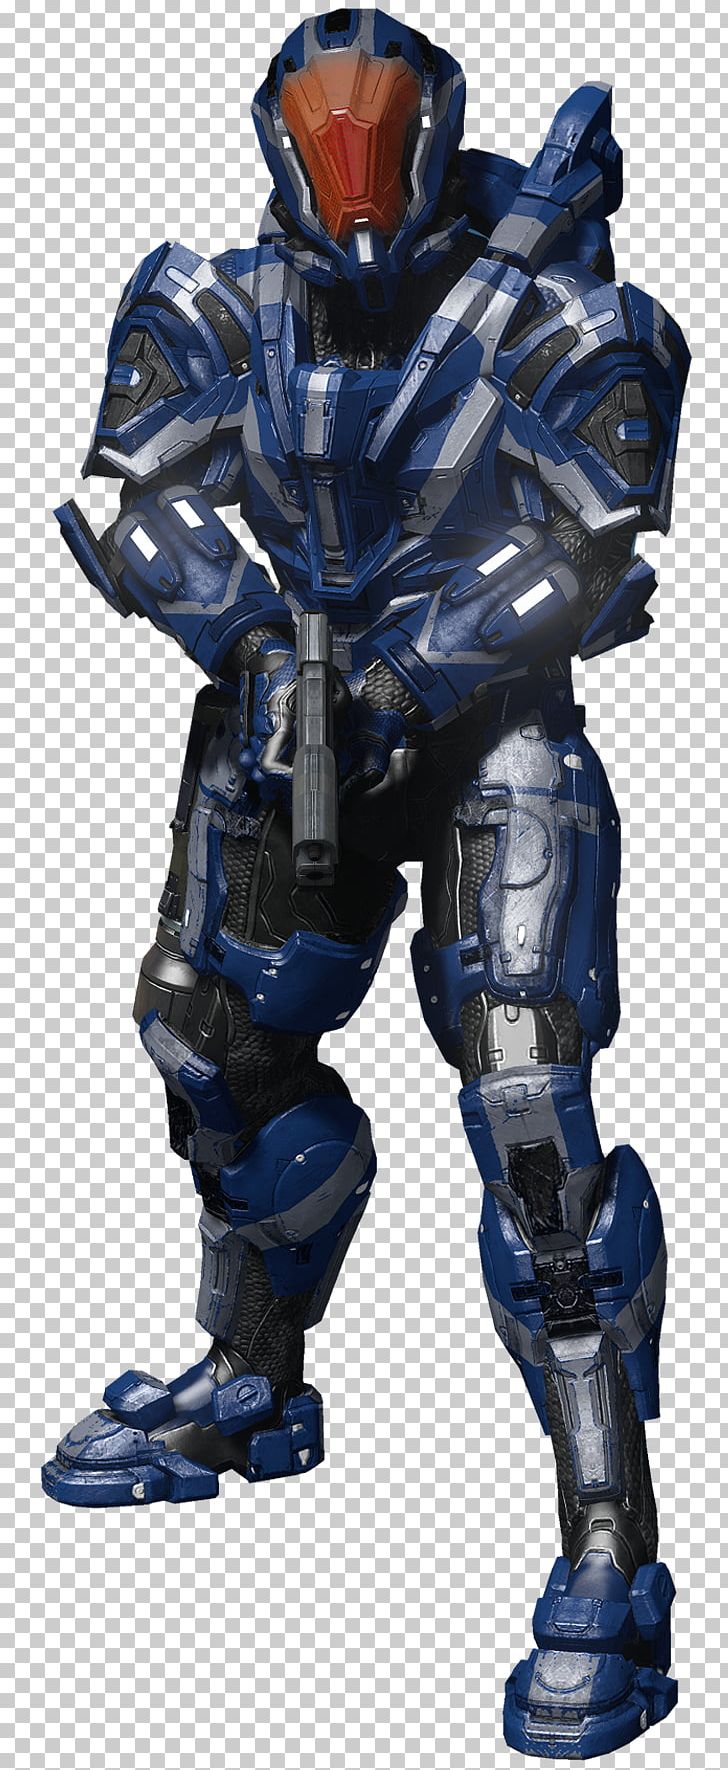 Halo 4 Halo 5: Guardians Halo Wars 2 Halo 3 Halo 2 PNG, Clipart, 343 Industries, Action Figure, Armour, Emblem, Factions Of Halo Free PNG Download